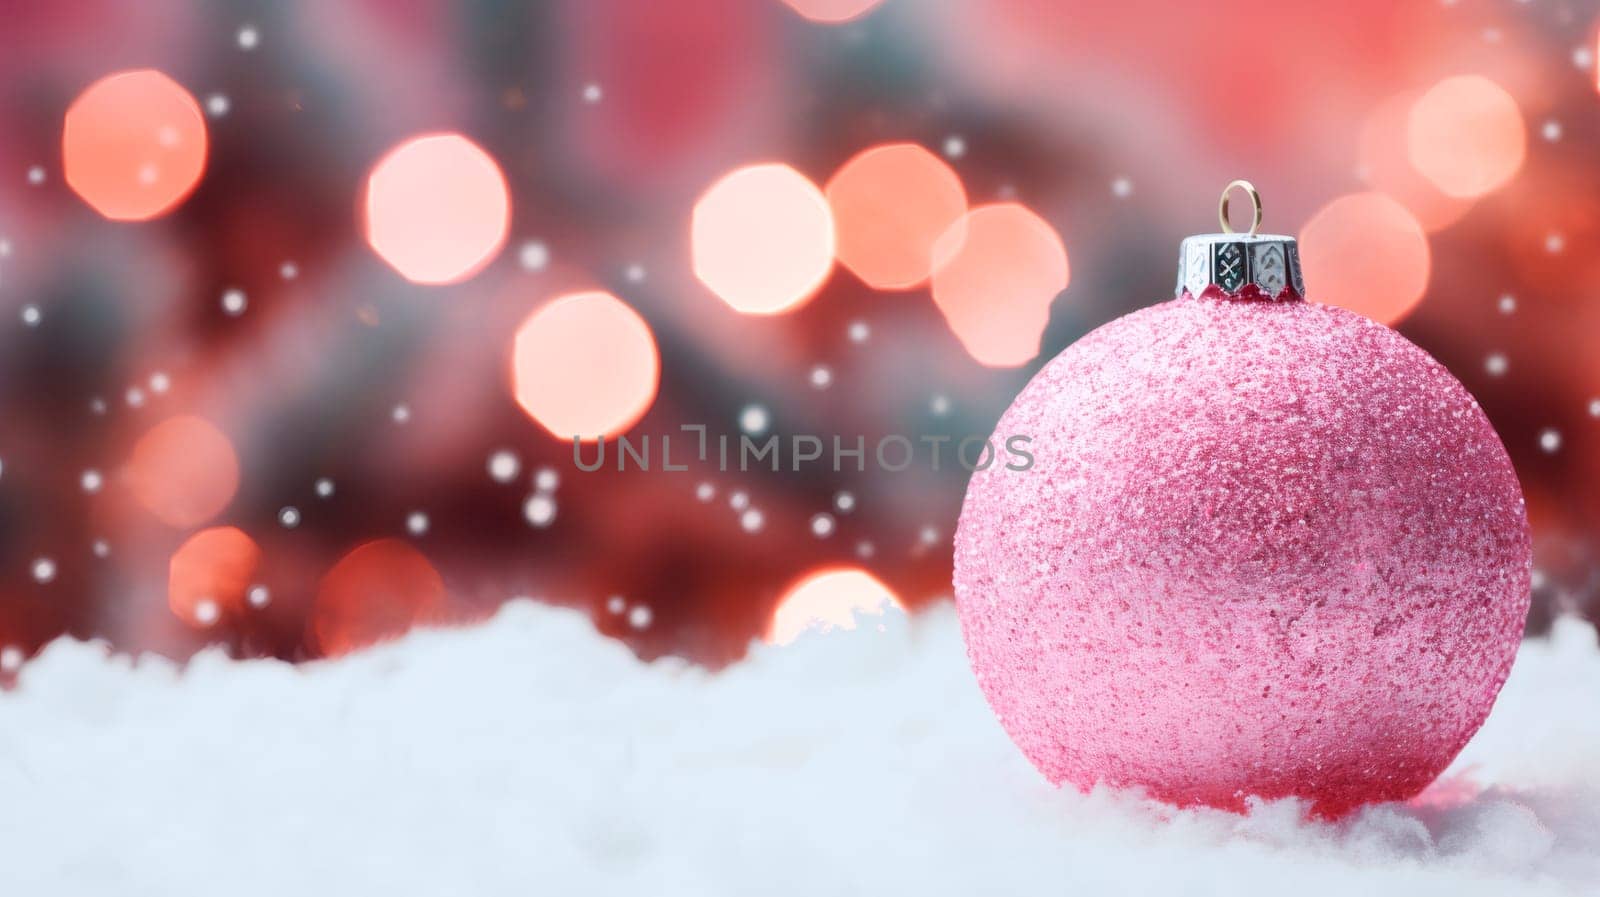 One beautiful soft pink Christmas tree ball lies on the spruce snow with copy space on the left against a background of blurred bokeh, close-up side view.